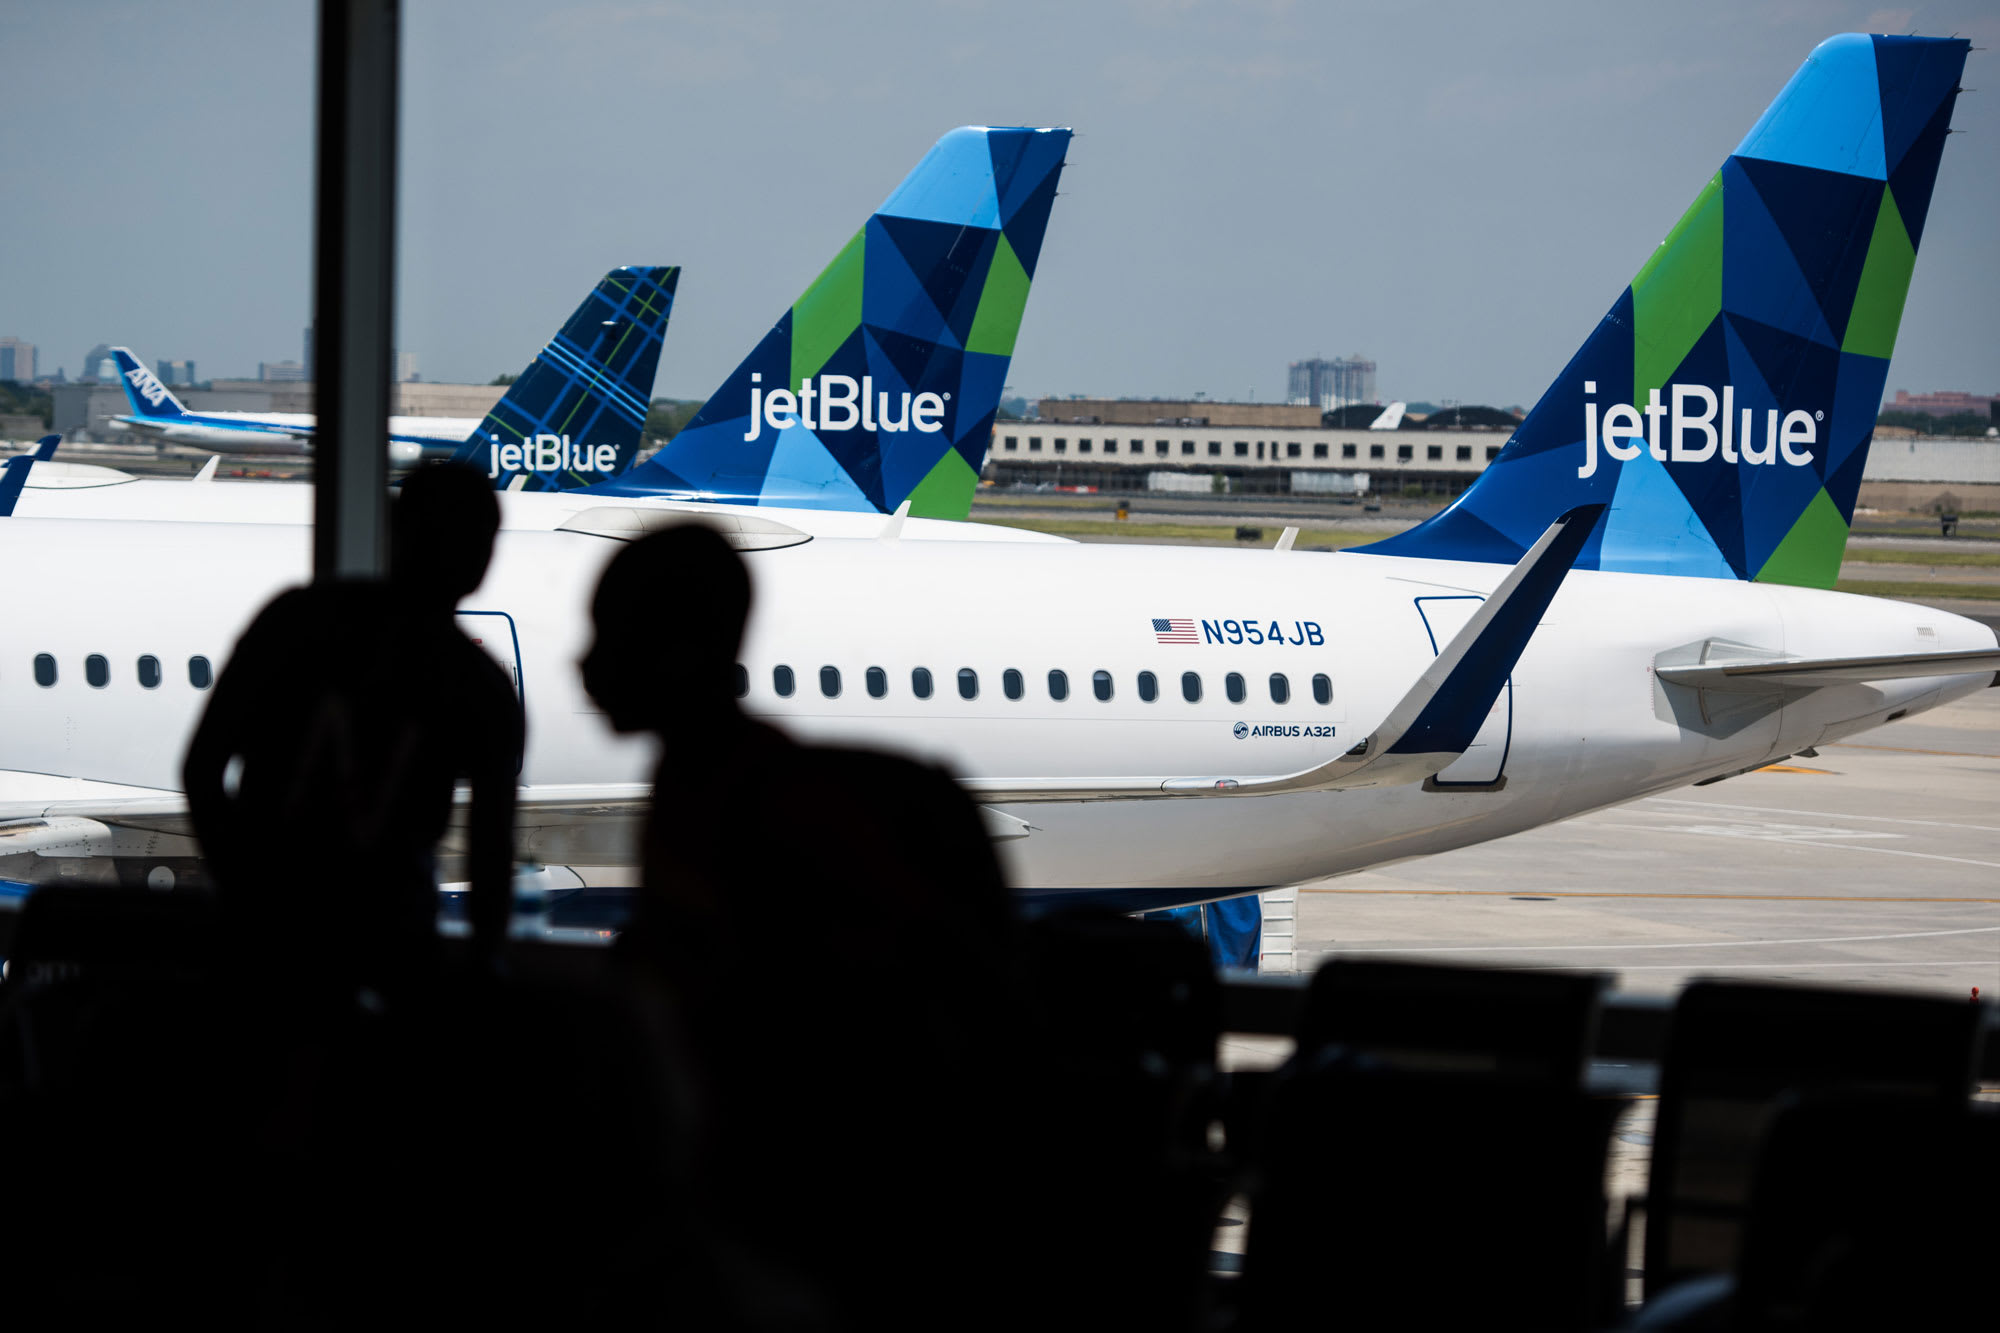 JetBlue to cease blocking seats on board in January